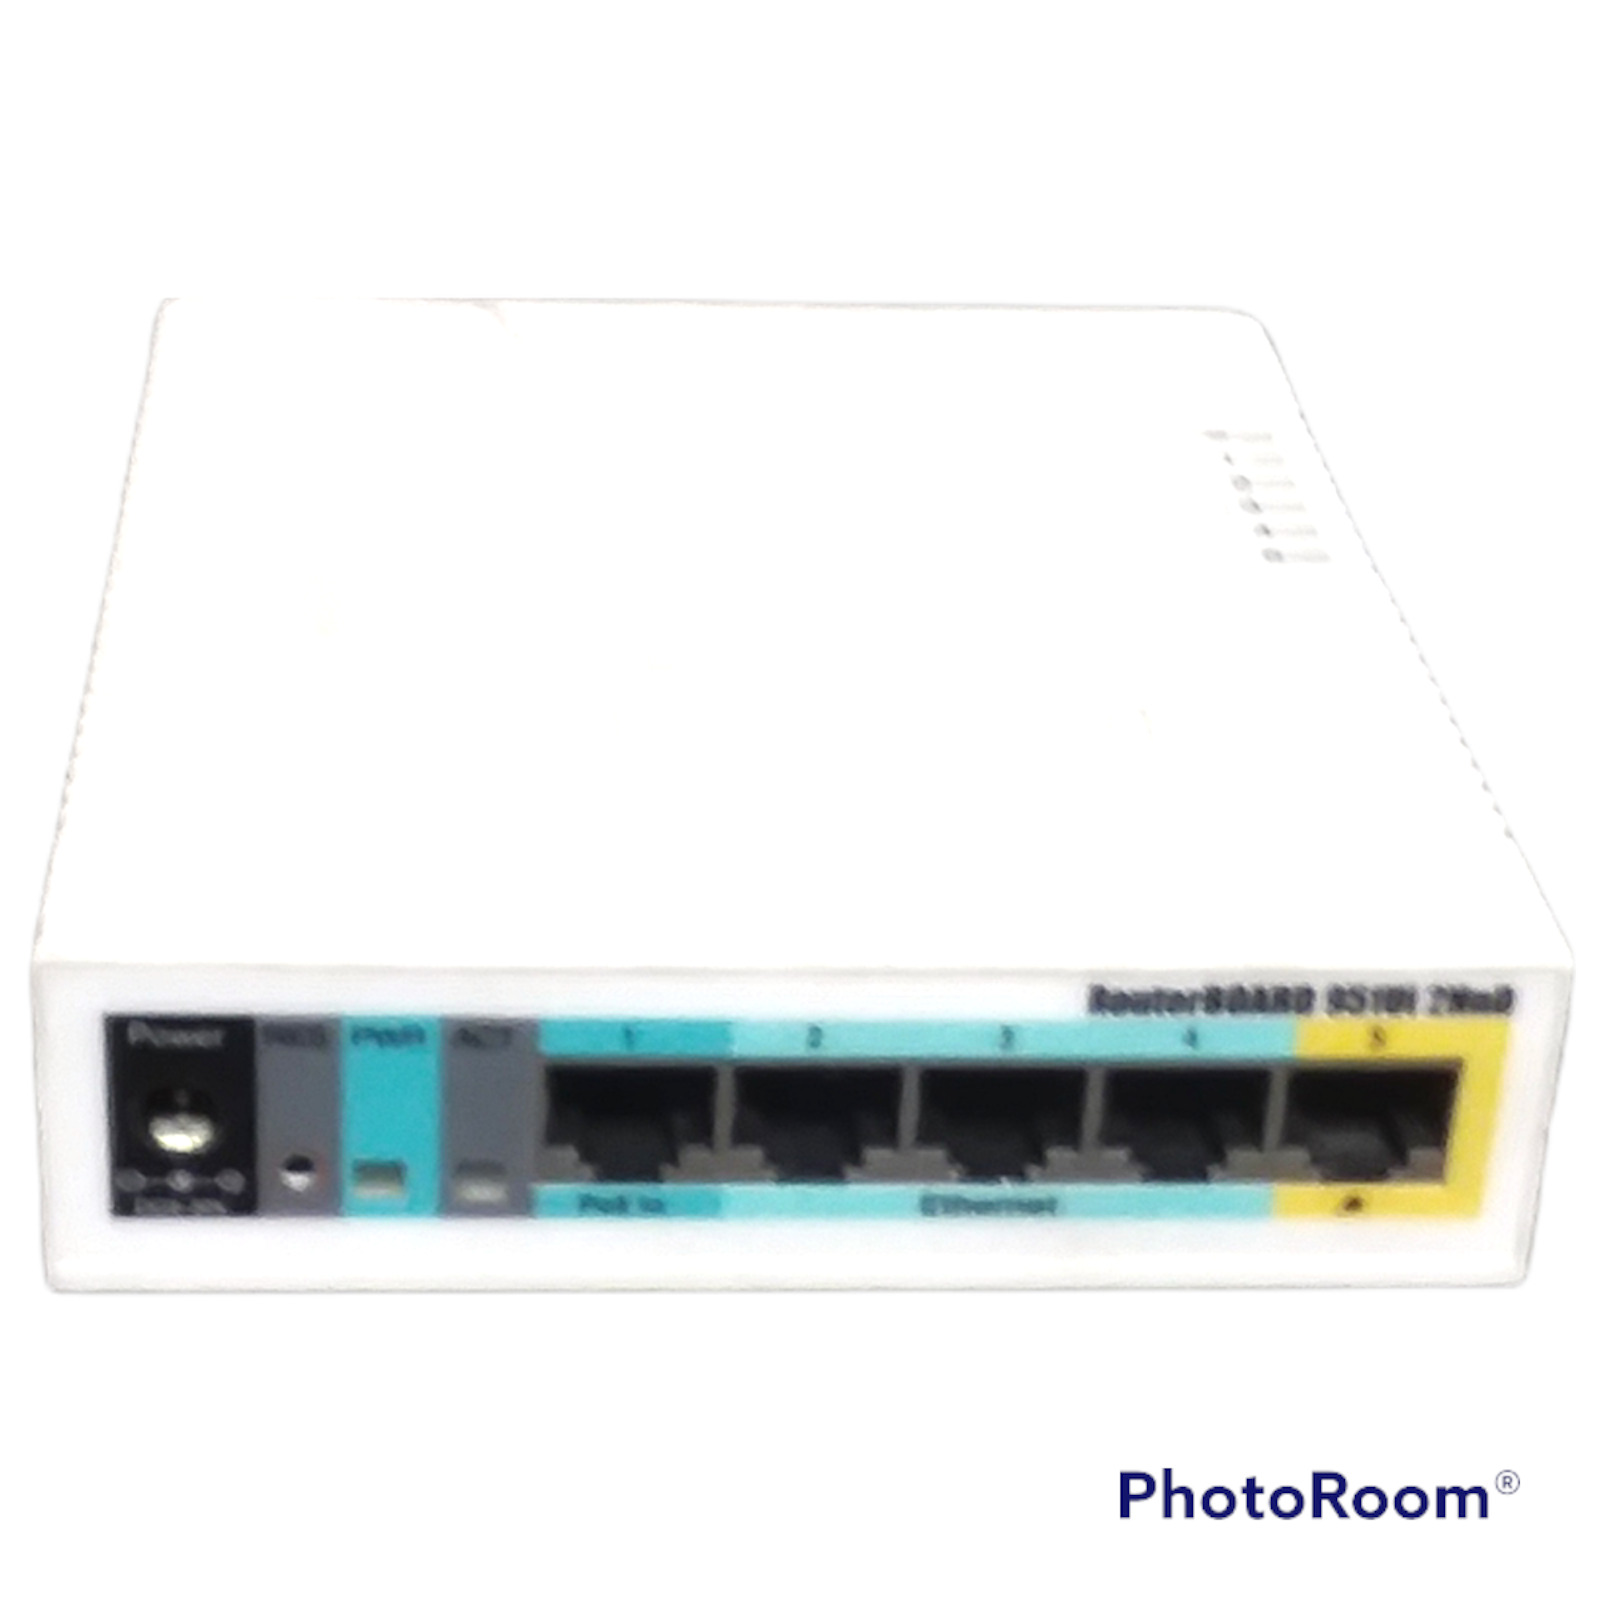 Mikrotik RouterBoard RB951Ui-2HnD 2.4GHz AP 5 Ethernet ports (No Power Cord) US